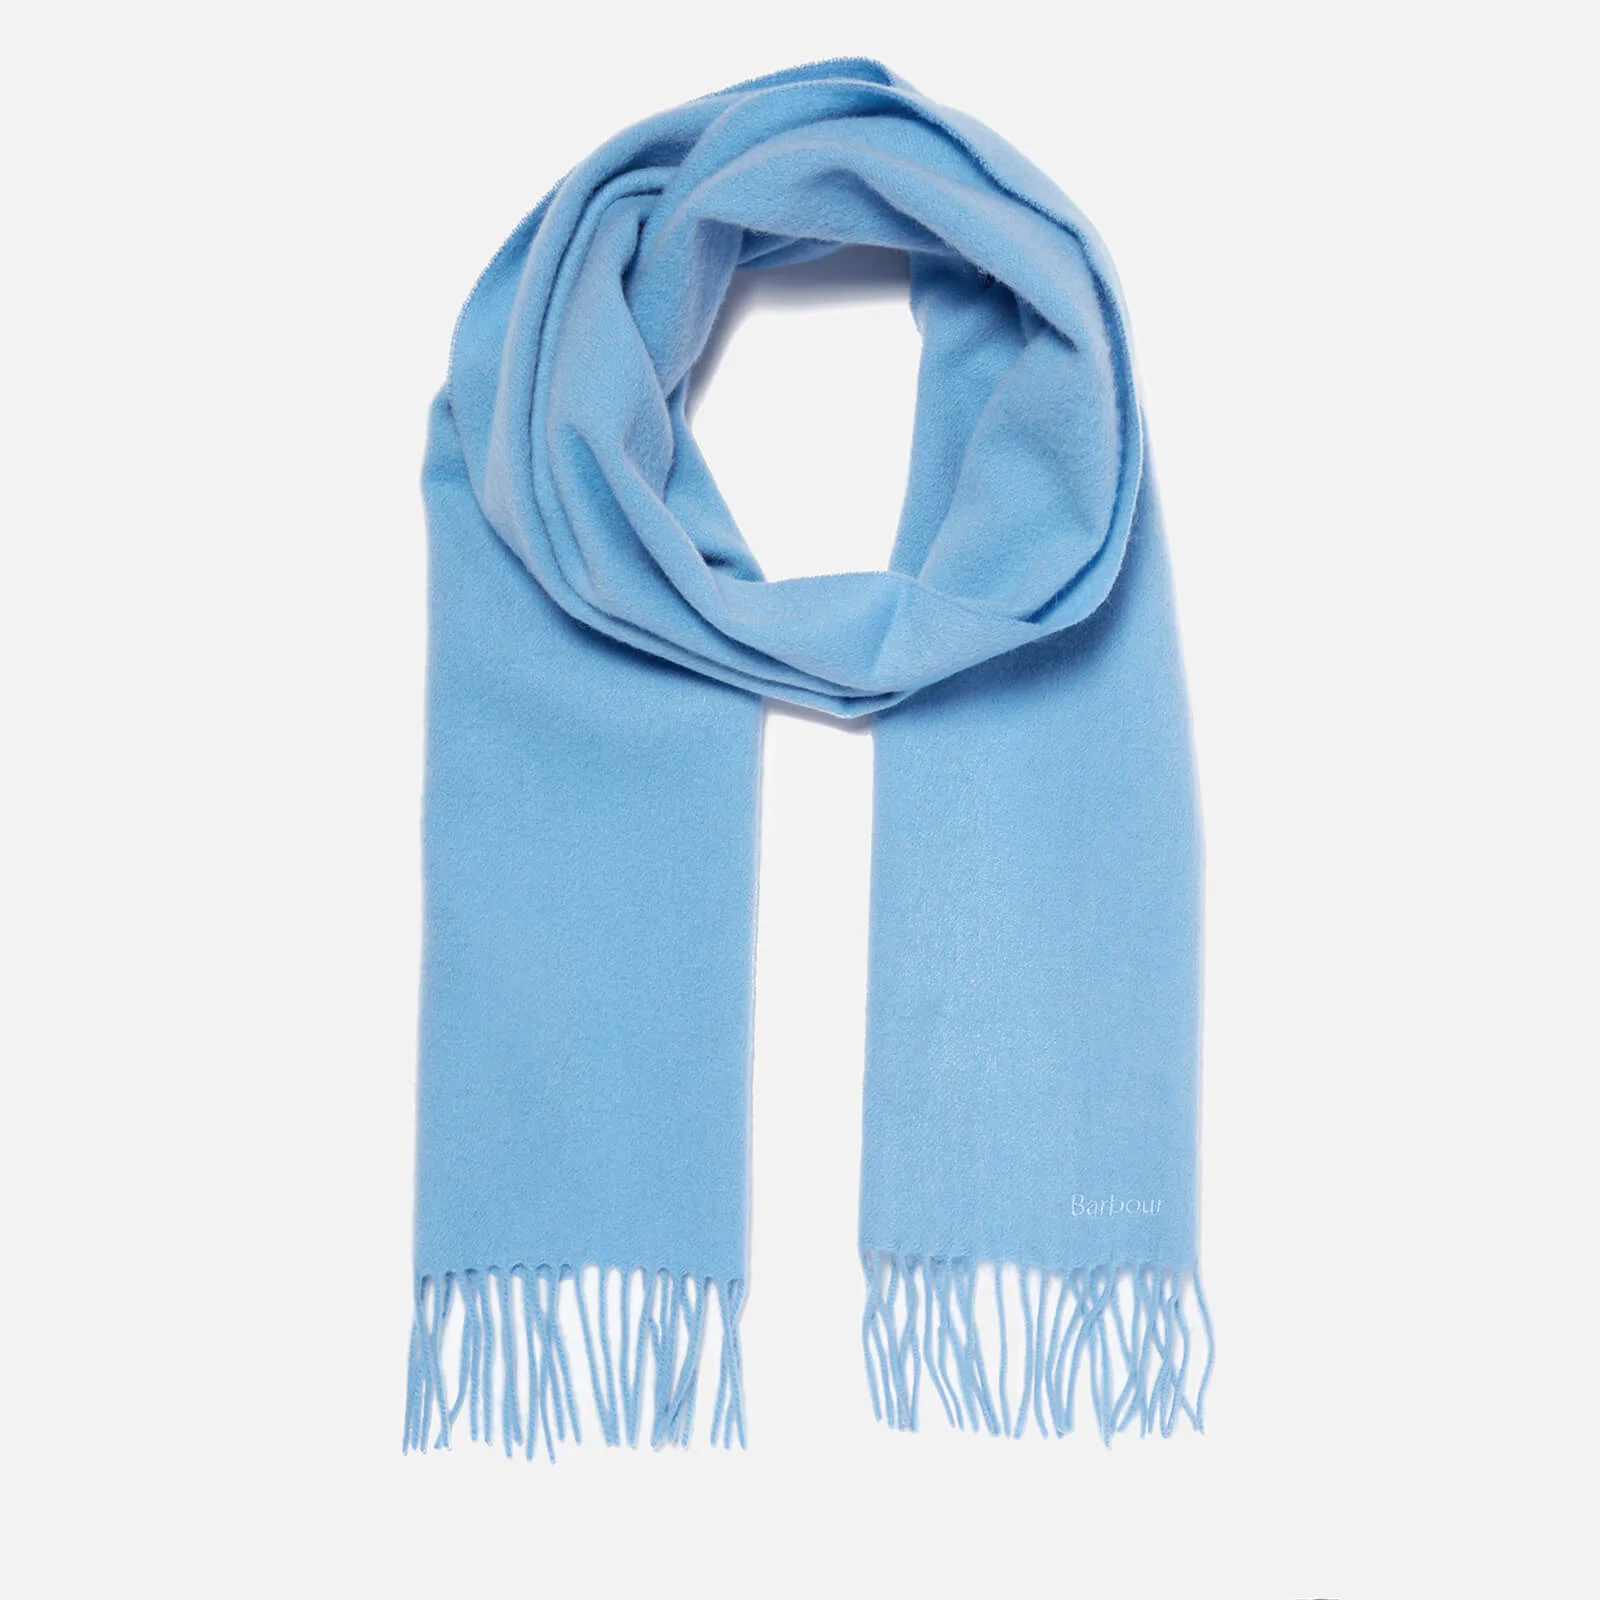 Barbour Lambswool Woven Scarf - Pale Blue Image 1